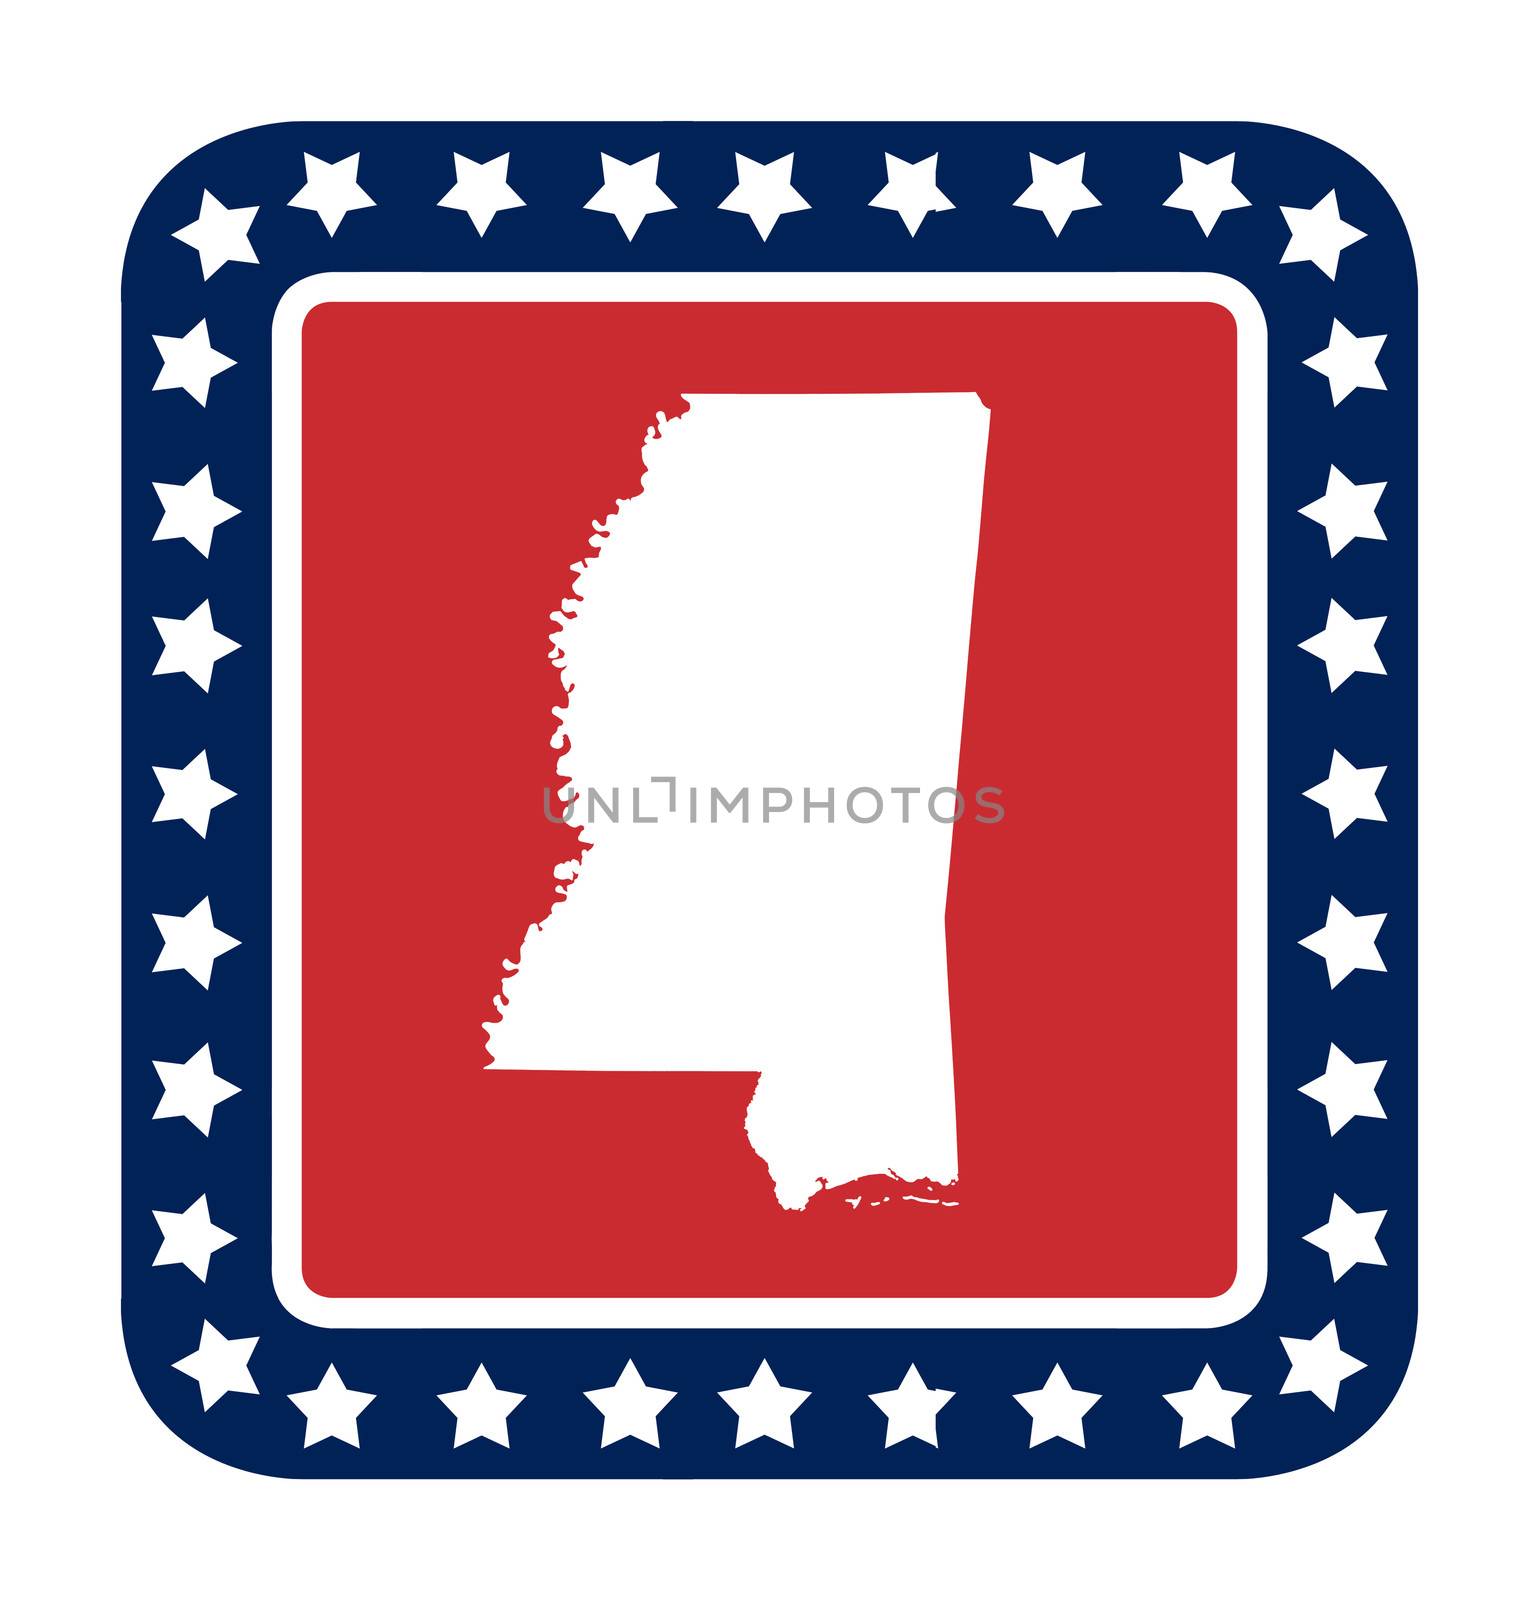 Mississippi state button on American flag in flat web design style, isolated on white background.